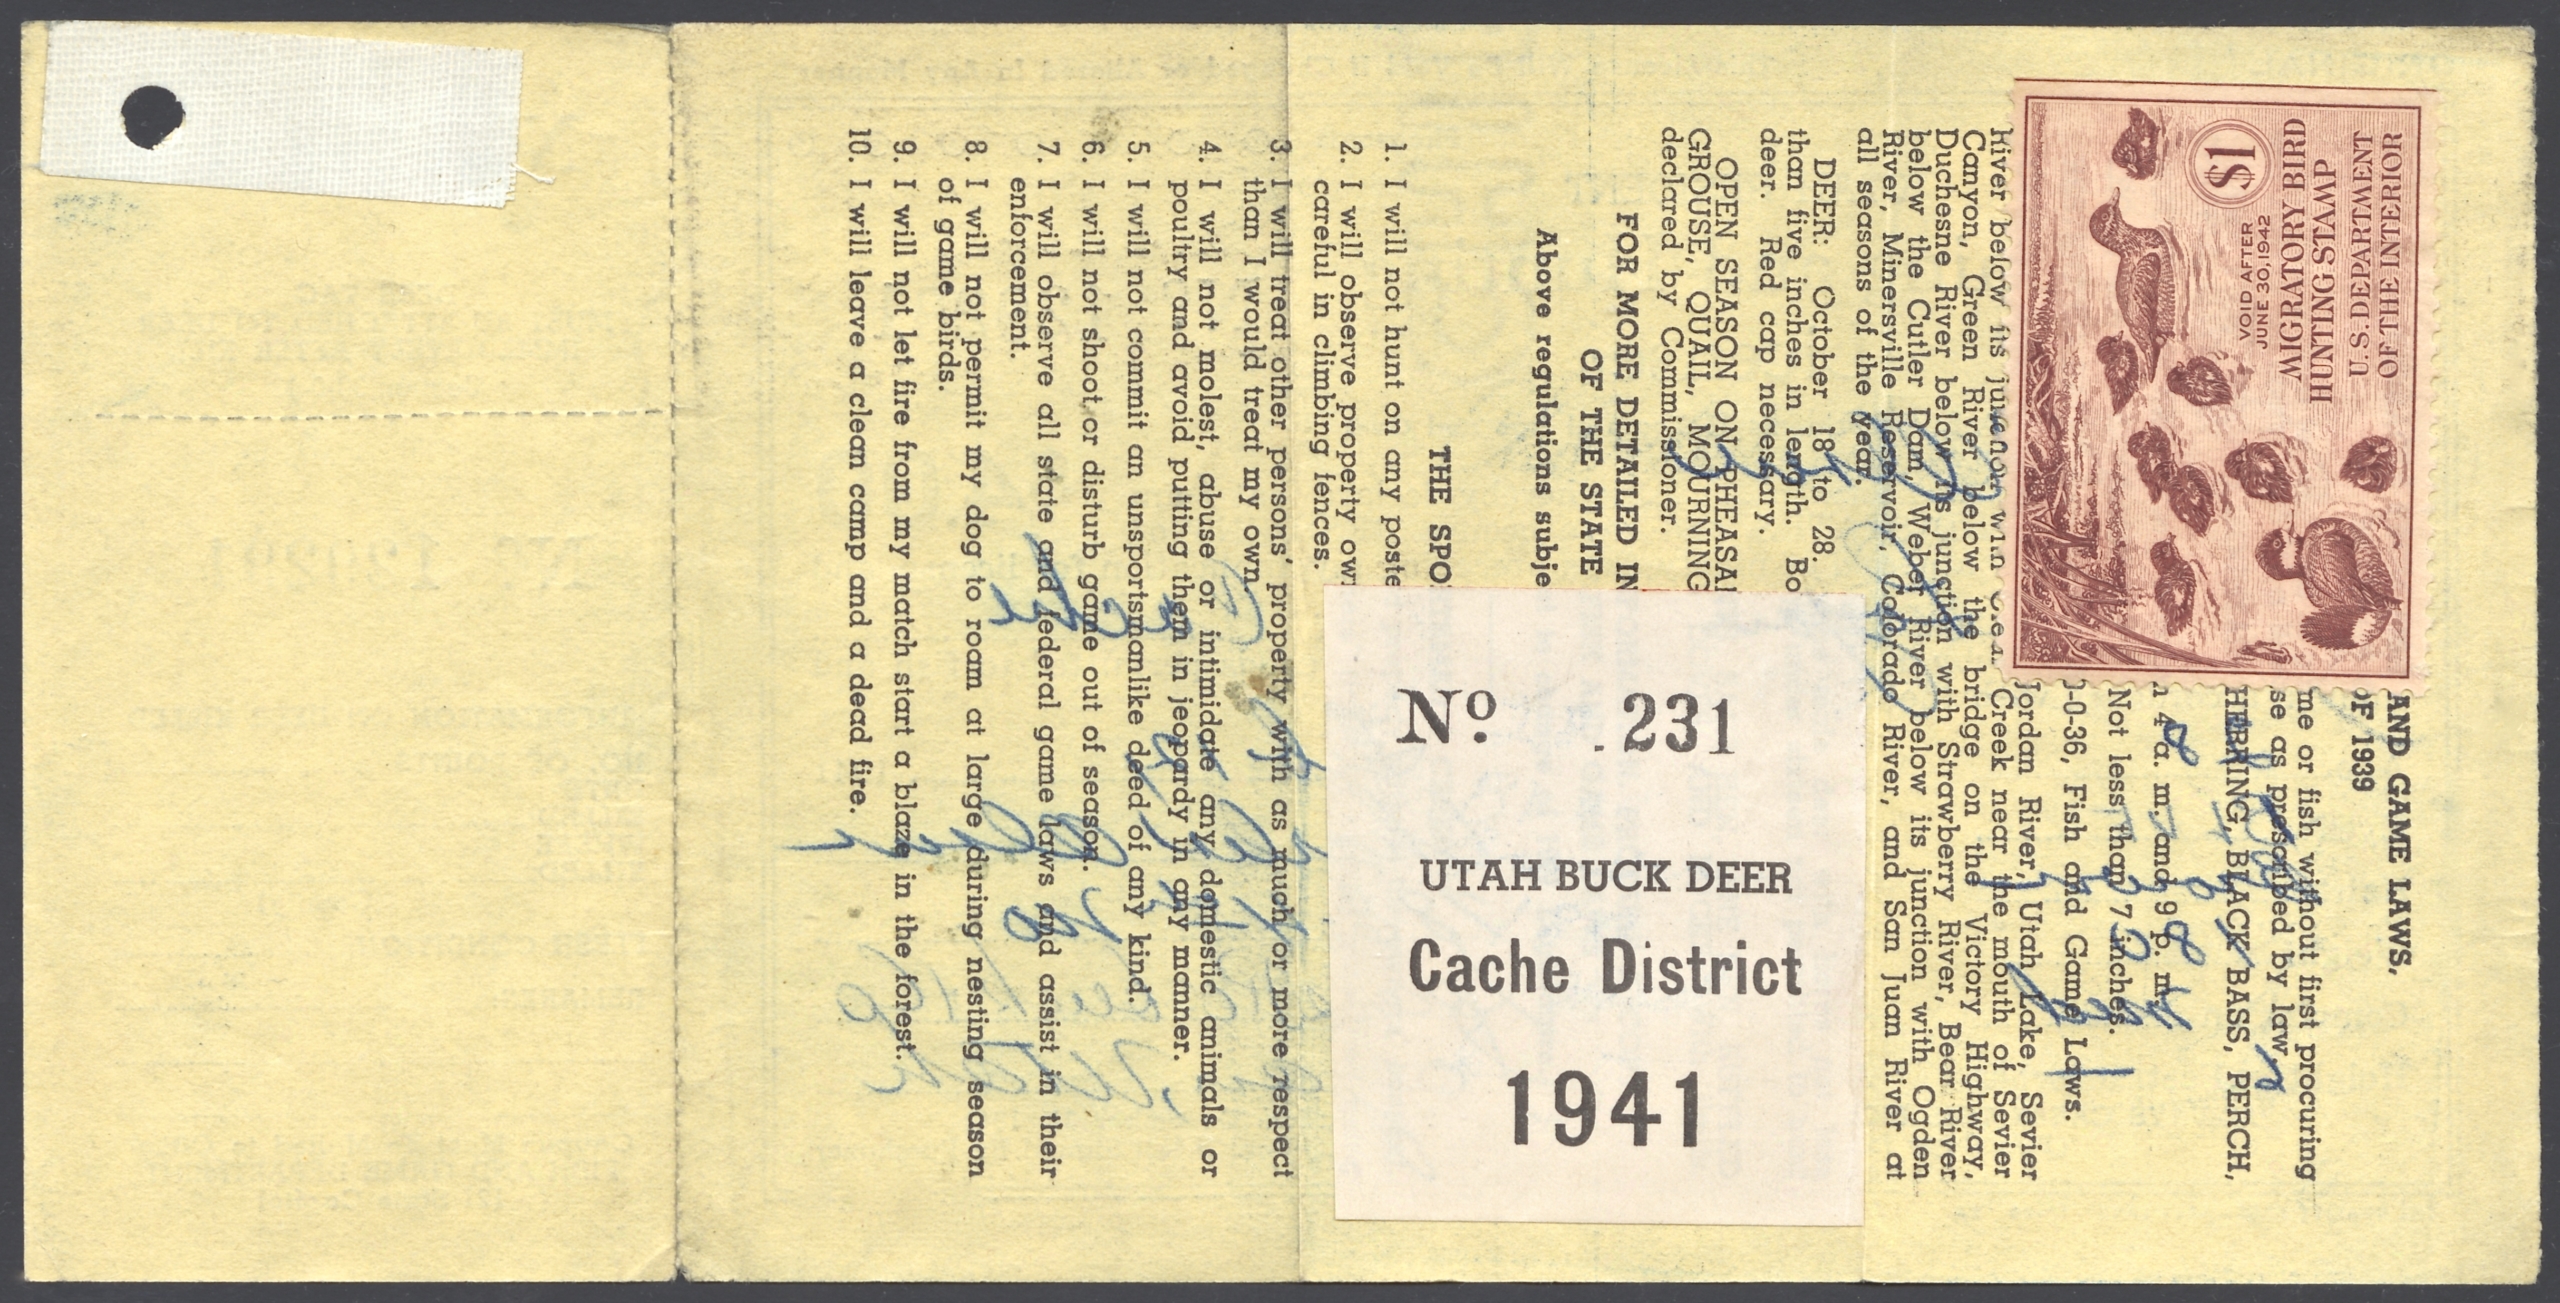 1941 Utah Buck Deer - Cache District on license with RW8